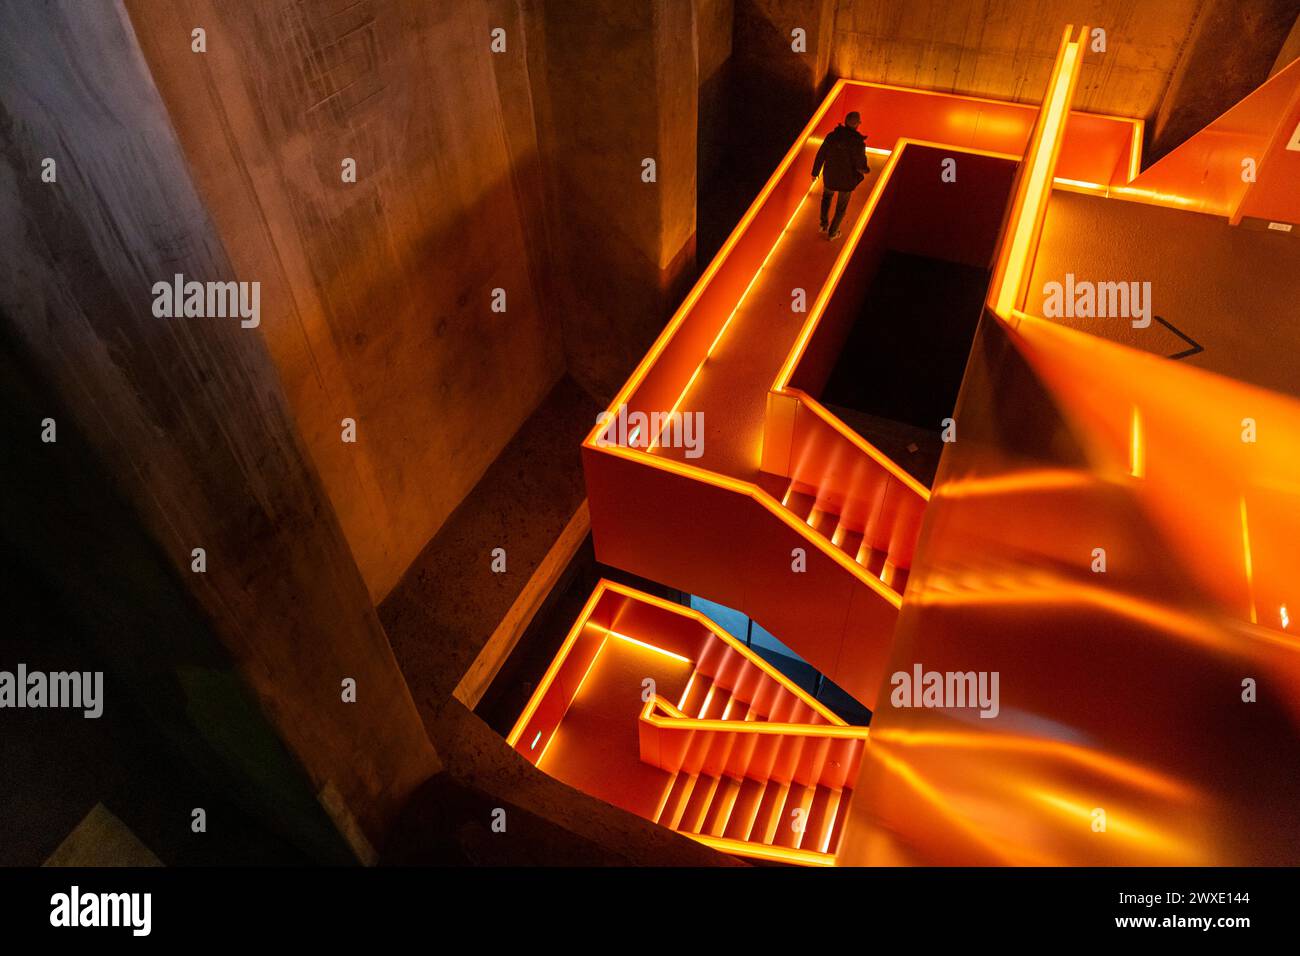 The orange illuminated staircase at Zeche Zollverein industrial monument and Ruhrmuseum, interior, Ruhr Area, Essen, Germany Stock Photo